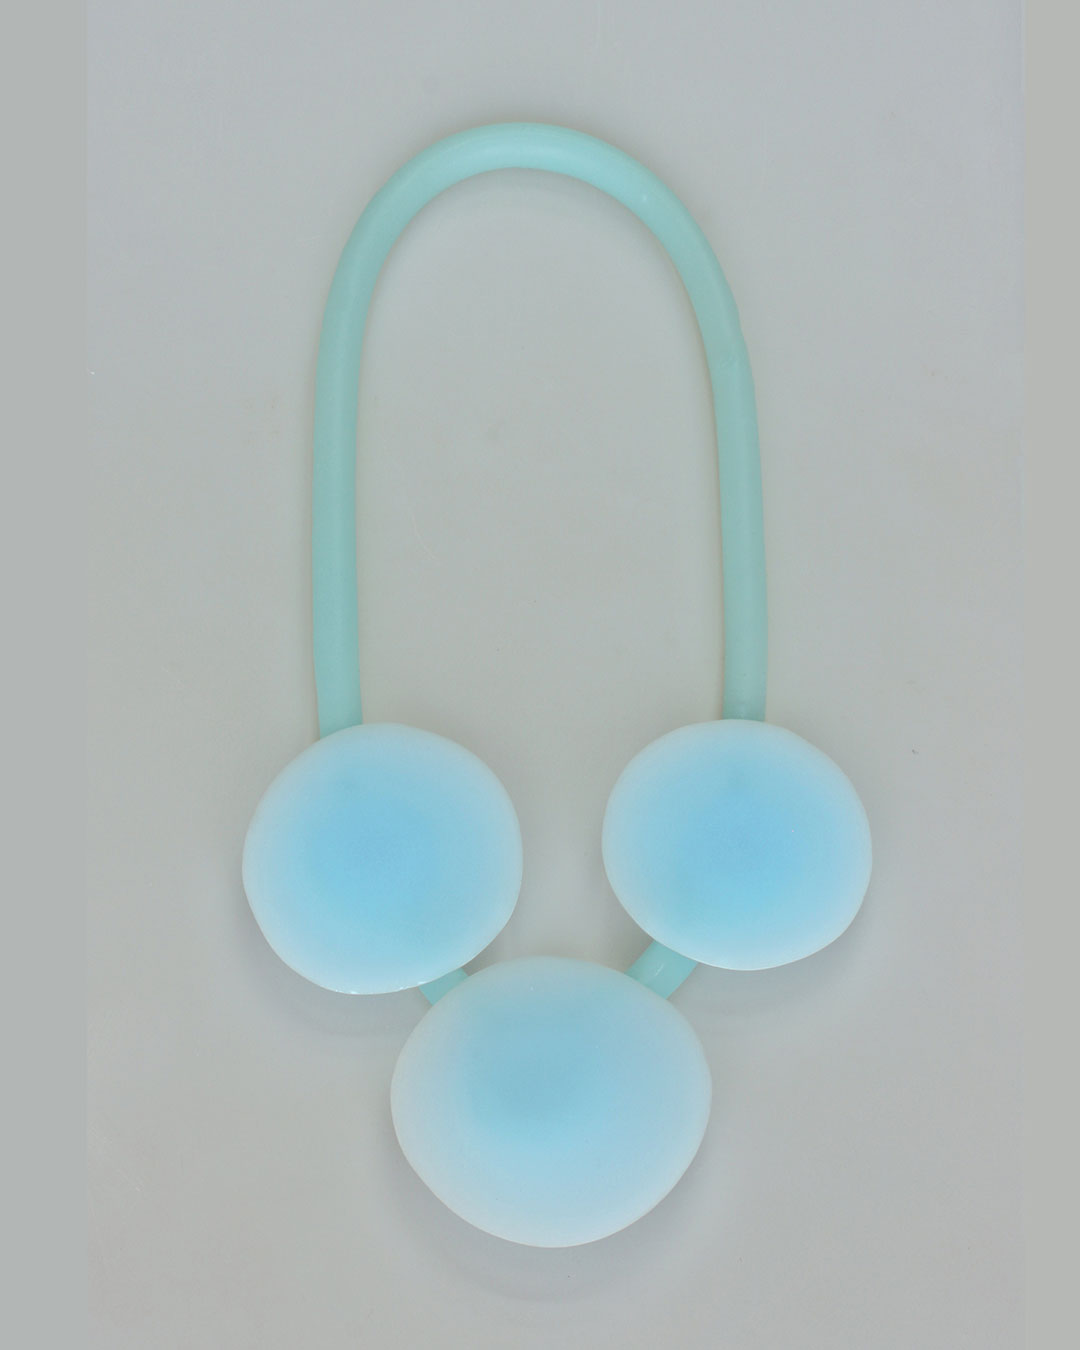 Ela Bauer, necklace, 2017, resin, pigment, silicone rubber, 355 x 155 x 20 mm, €920